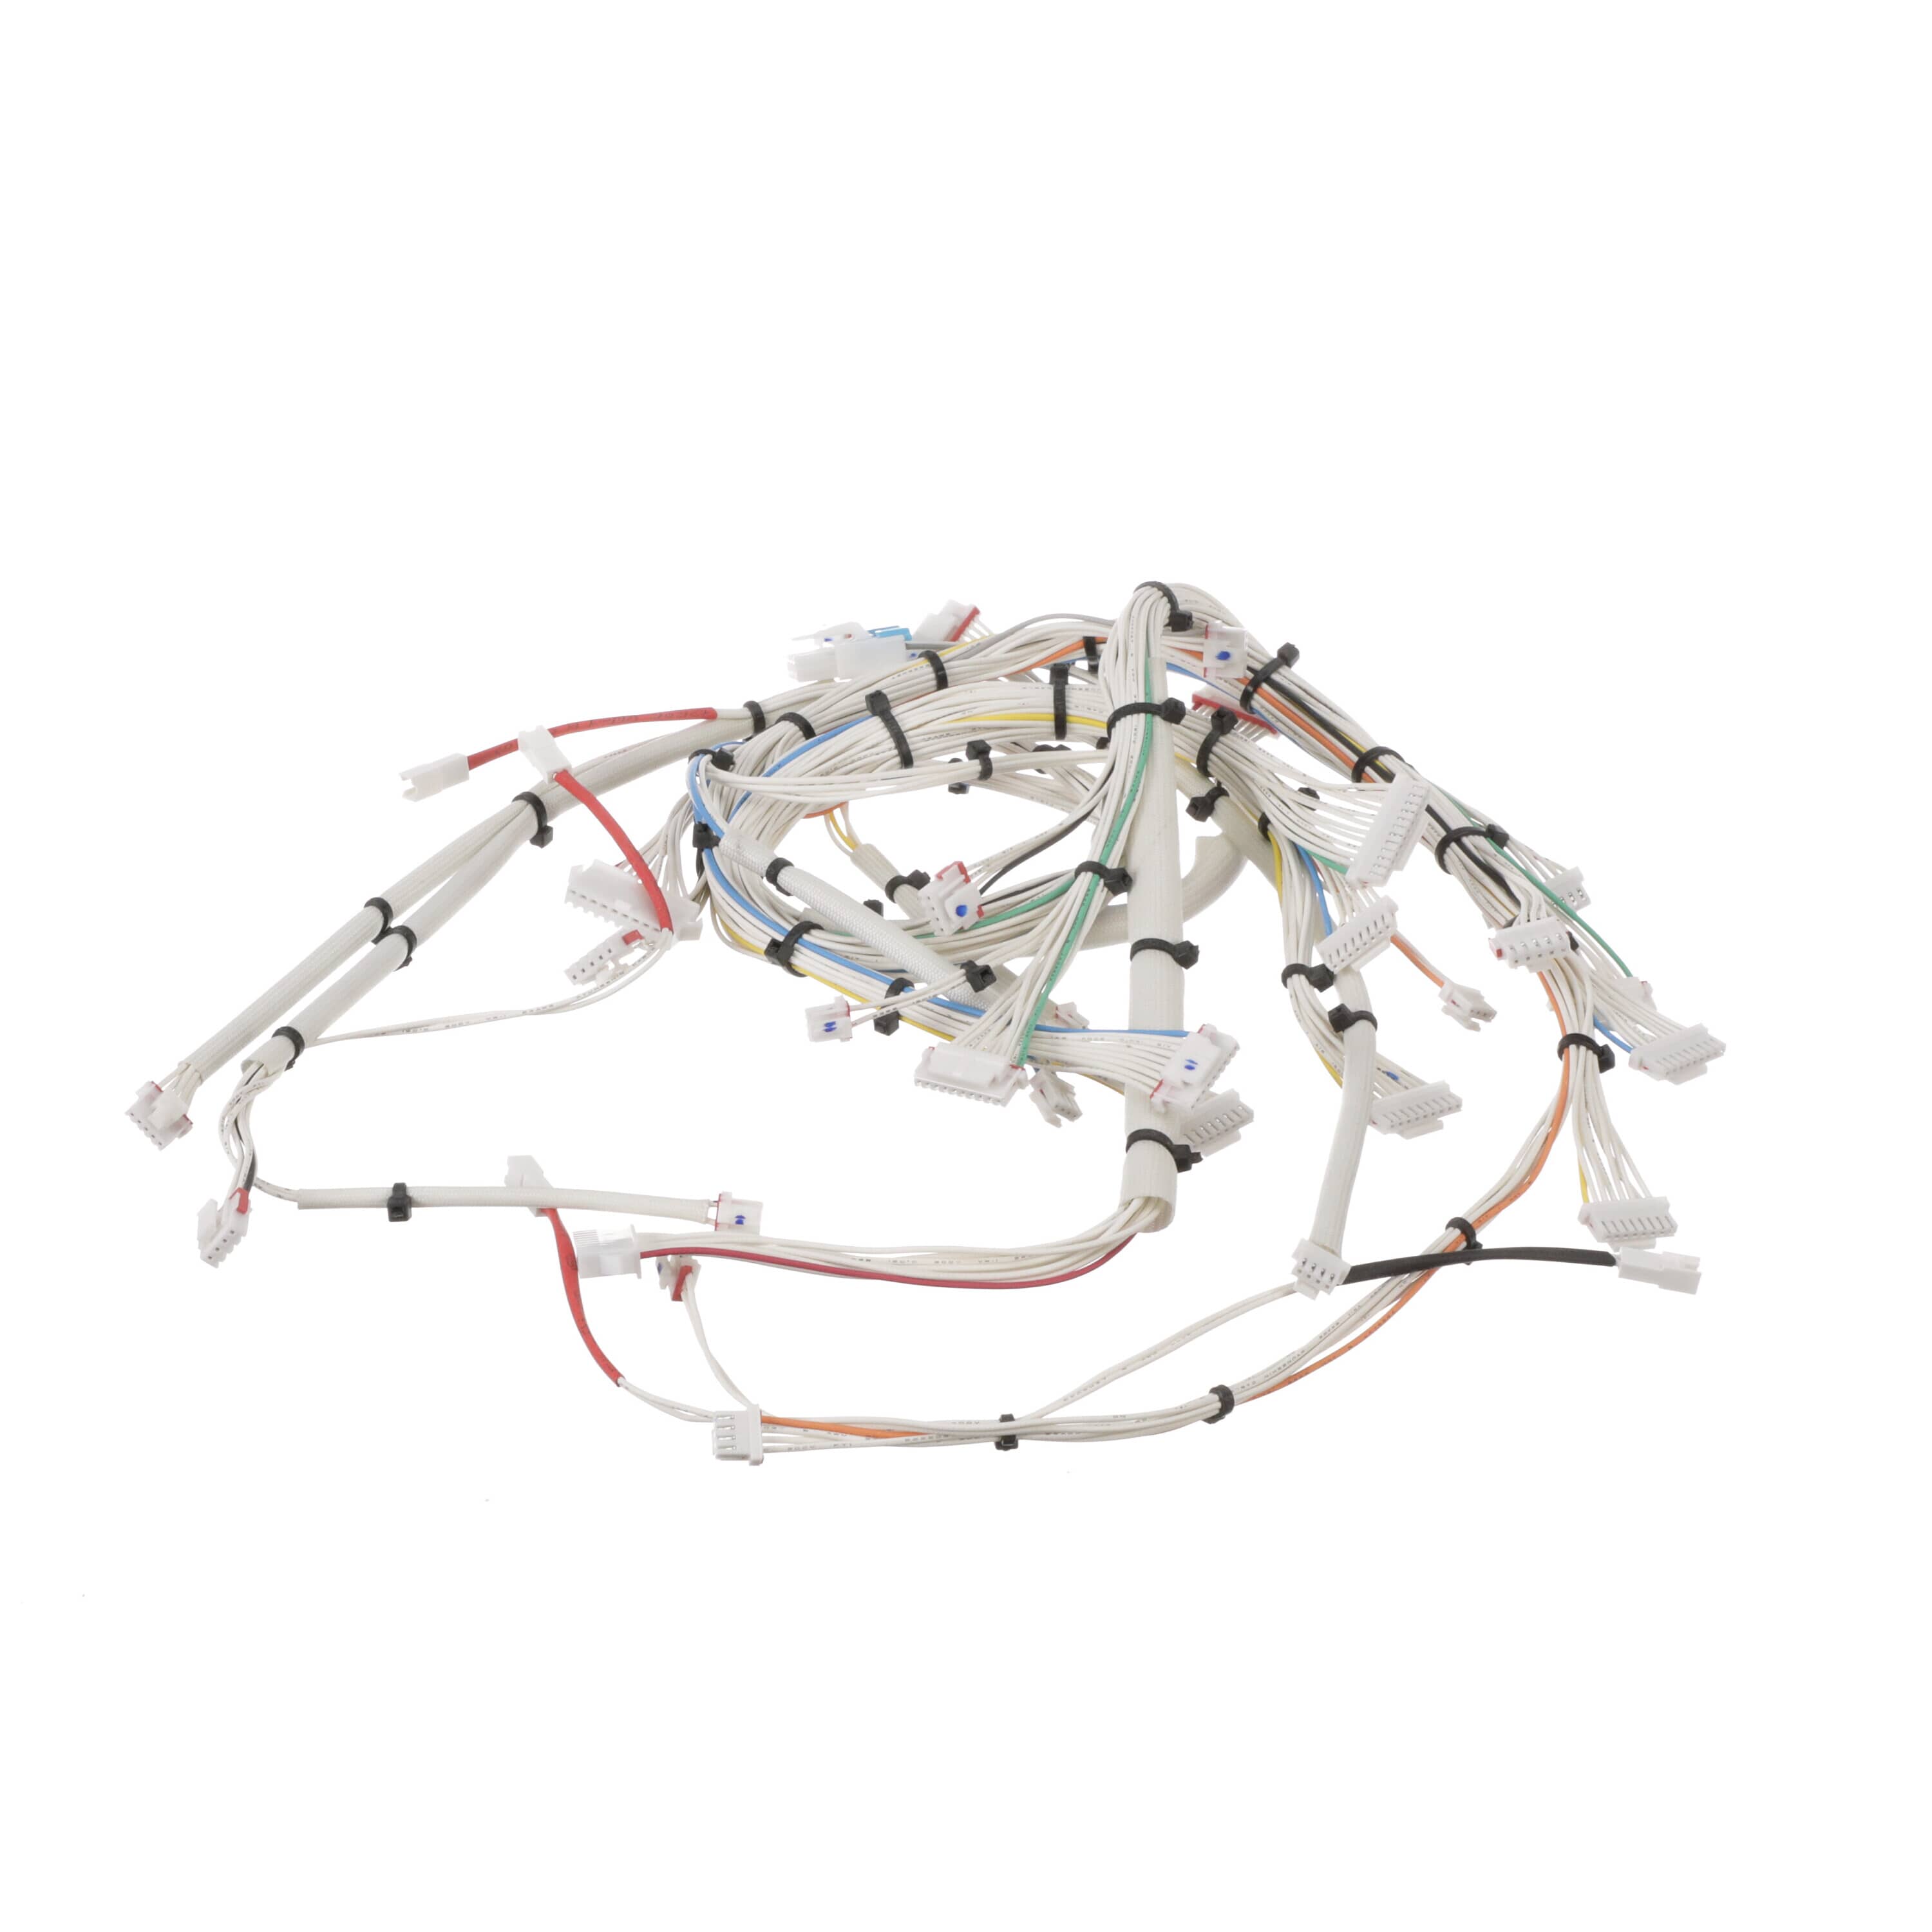 DG96-00360A ASSEMBLY WIRE HARNESS-DC SIGNA - Samsung Parts USA